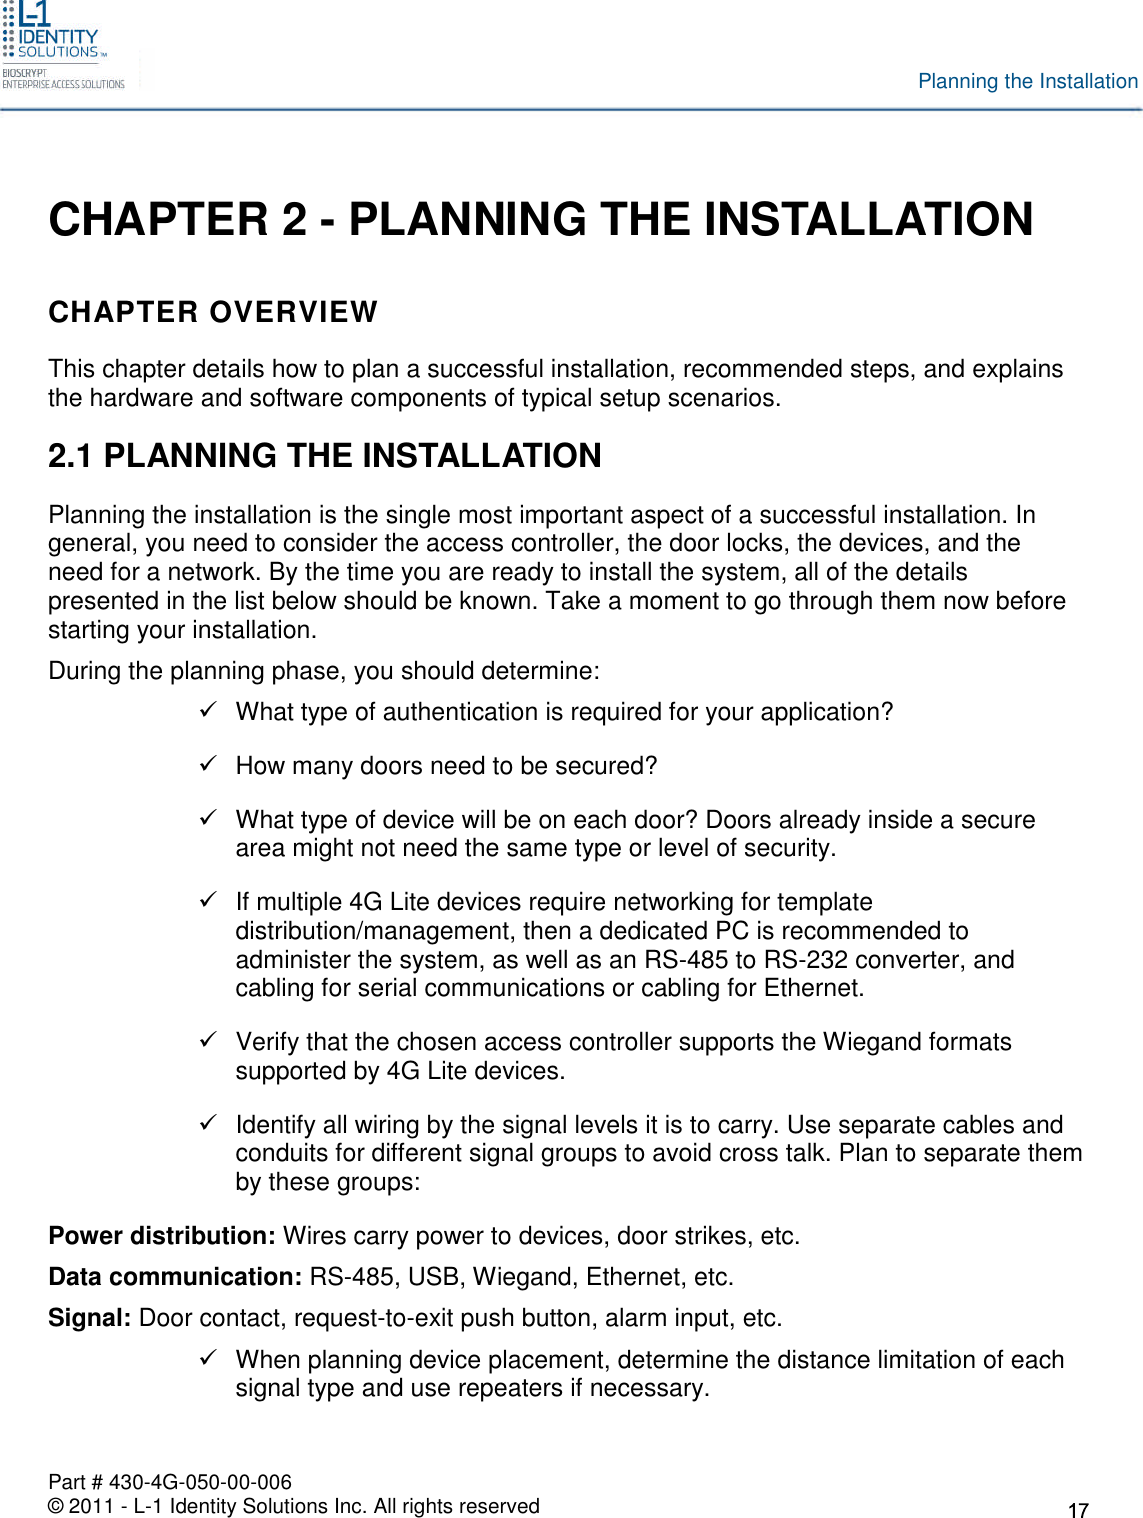 Part # 430-4G-050-00-006© 2011 - L-1 Identity Solutions Inc. All rights reservedPlanning the InstallationCHAPTER 2 - PLANNING THE INSTALLATIONCHAPTER OVERVIEWThis chapter details how to plan a successful installation, recommended steps, and explainsthe hardware and software components of typical setup scenarios.2.1 PLANNING THE INSTALLATIONPlanning the installation is the single most important aspect of a successful installation. Ingeneral, you need to consider the access controller, the door locks, the devices, and theneed for a network. By the time you are ready to install the system, all of the detailspresented in the list below should be known. Take a moment to go through them now beforestarting your installation.During the planning phase, you should determine:What type of authentication is required for your application?How many doors need to be secured?What type of device will be on each door? Doors already inside a securearea might not need the same type or level of security.If multiple 4G Lite devices require networking for templatedistribution/management, then a dedicated PC is recommended toadminister the system, as well as an RS-485 to RS-232 converter, andcabling for serial communications or cabling for Ethernet.Verify that the chosen access controller supports the Wiegand formatssupported by 4G Lite devices.Identify all wiring by the signal levels it is to carry. Use separate cables andconduits for different signal groups to avoid cross talk. Plan to separate themby these groups:Power distribution: Wires carry power to devices, door strikes, etc.Data communication: RS-485, USB, Wiegand, Ethernet, etc.Signal: Door contact, request-to-exit push button, alarm input, etc.When planning device placement, determine the distance limitation of eachsignal type and use repeaters if necessary.